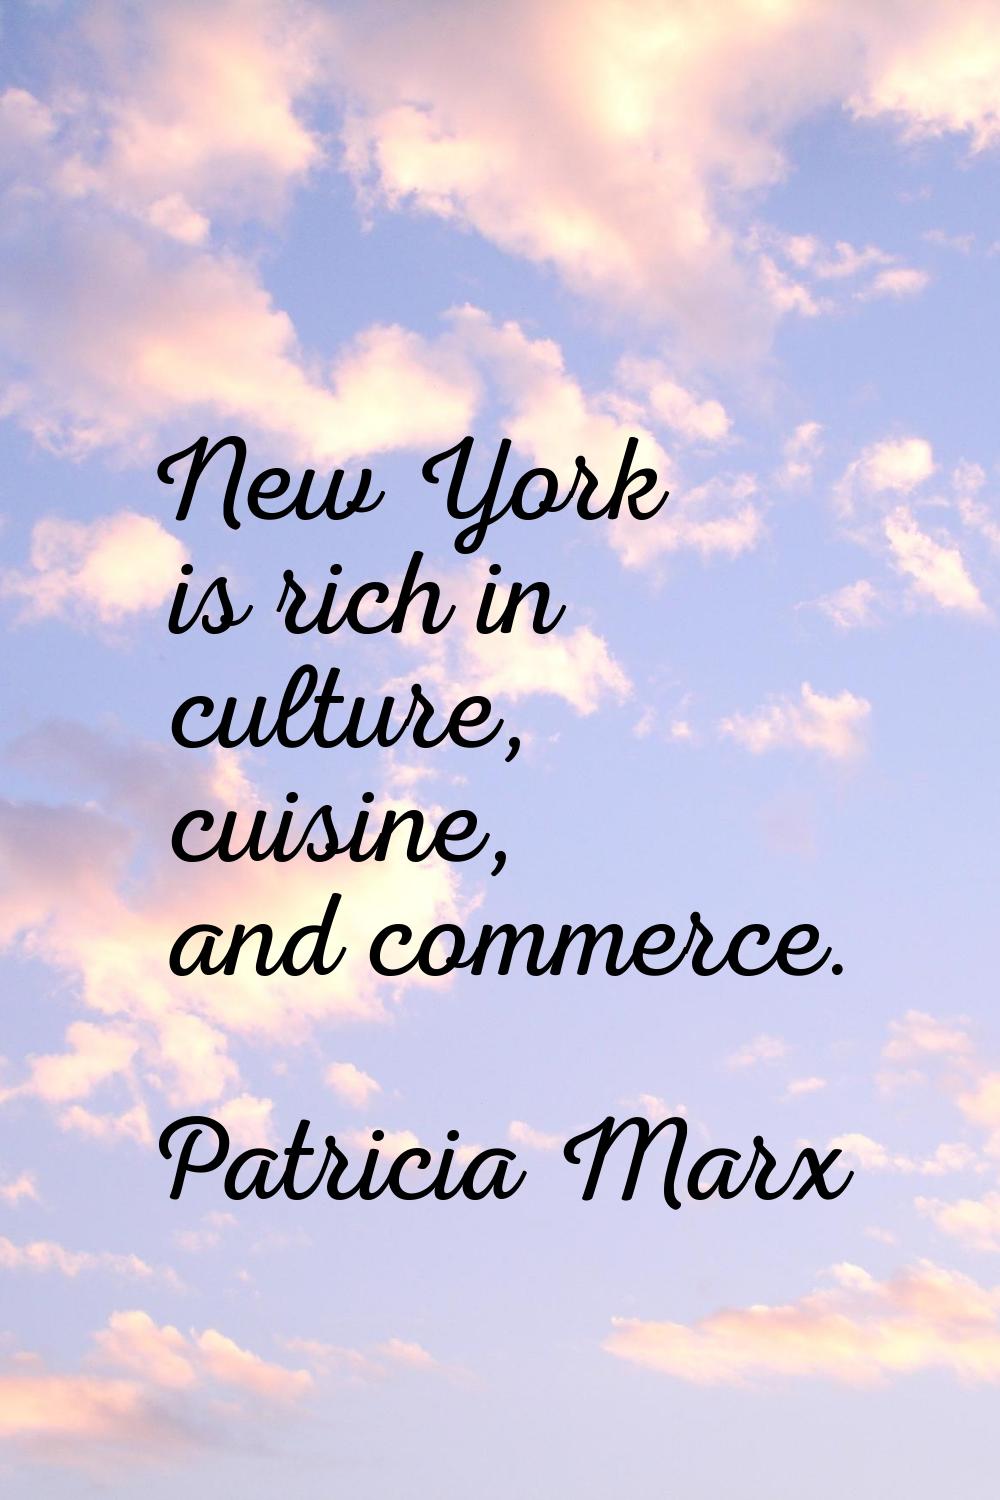 New York is rich in culture, cuisine, and commerce.